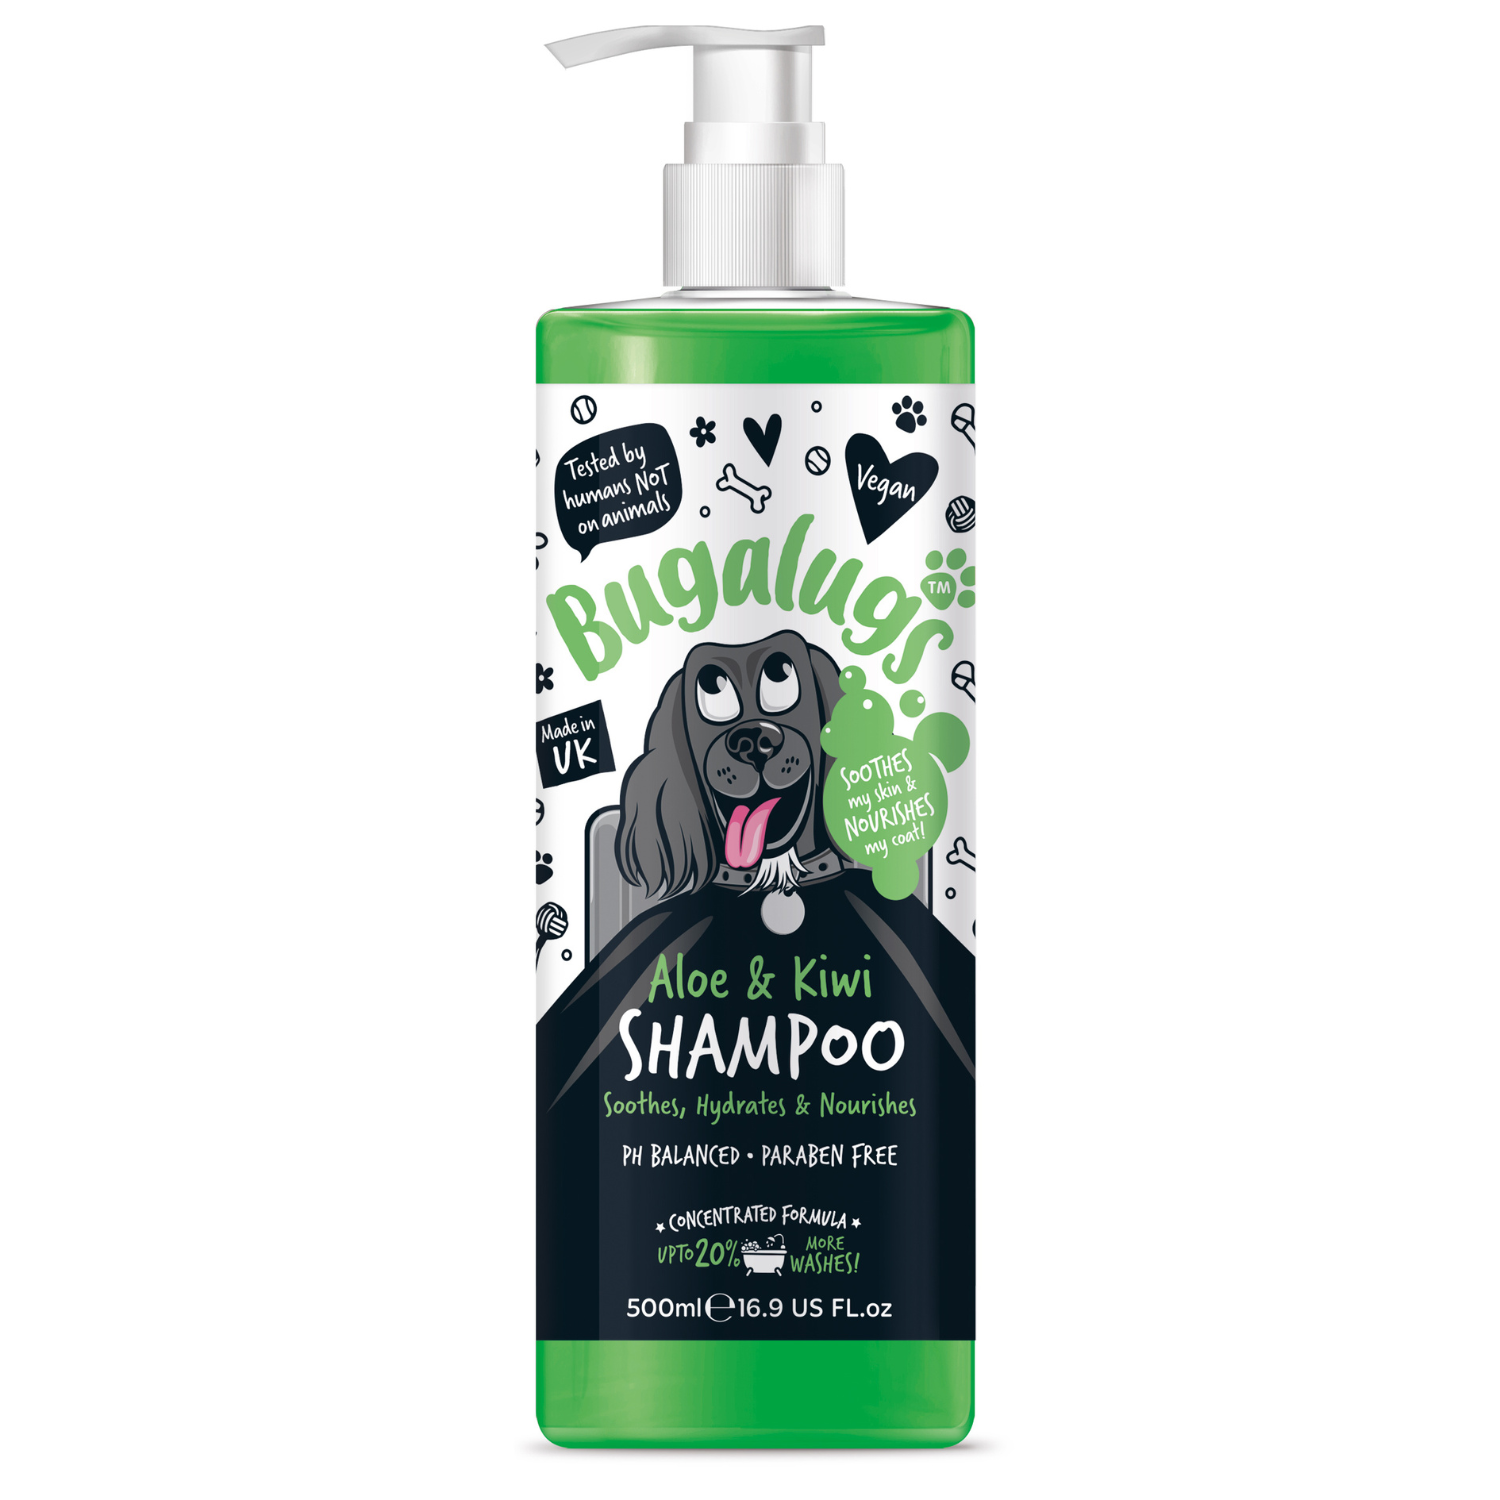 Bugalugs Aloe and Kiwi Shampoo for Dogs - Soothes, Hydrates and Nourishes